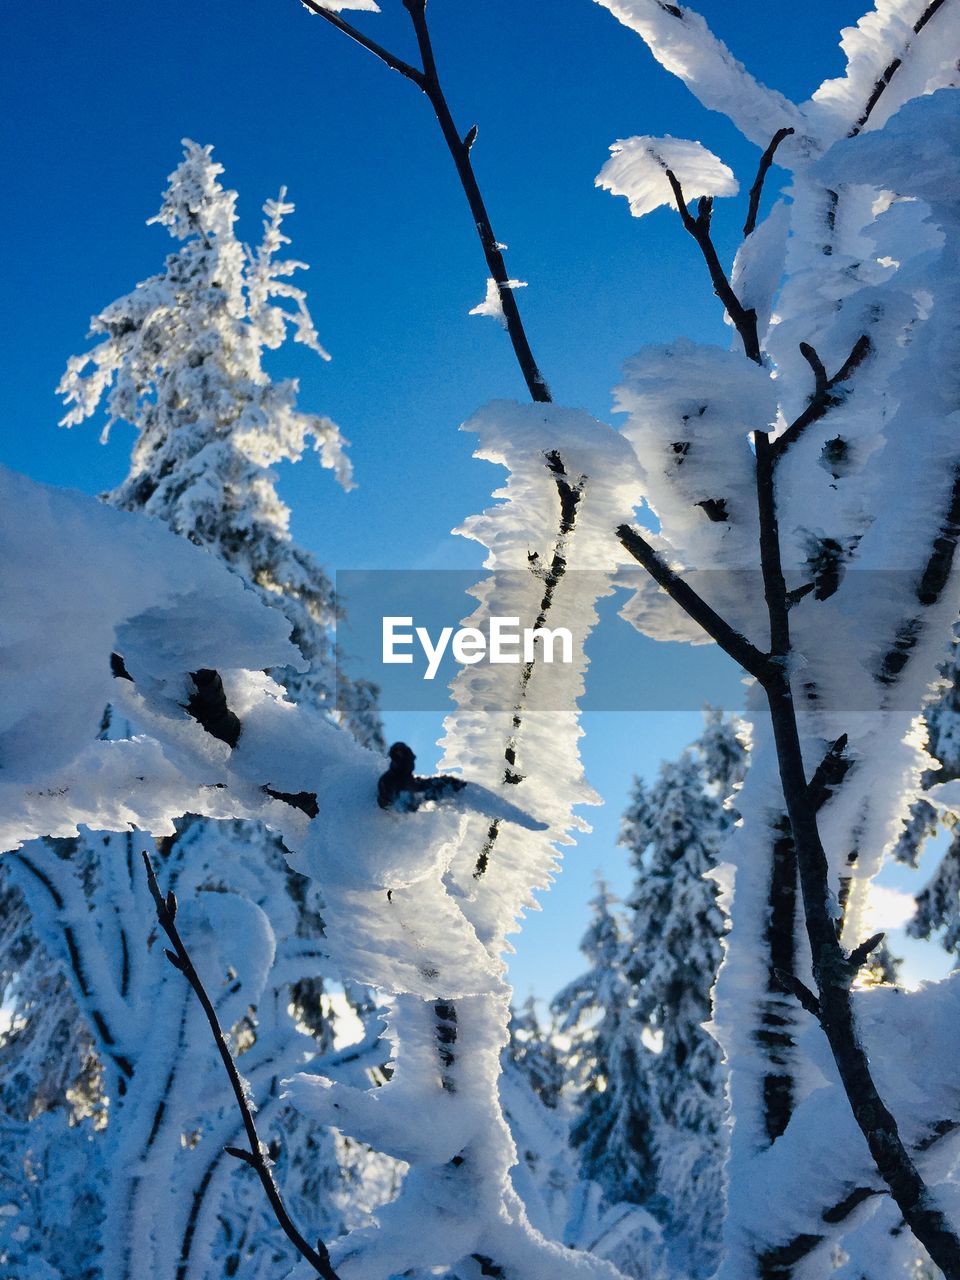 winter, snow, cold temperature, tree, nature, plant, beauty in nature, mountain, scenics - nature, sky, environment, freezing, landscape, blue, frozen, no people, tranquility, land, ice, day, white, tranquil scene, branch, outdoors, mountain range, non-urban scene, frost, forest, sunlight, snowcapped mountain, clear sky, coniferous tree, low angle view